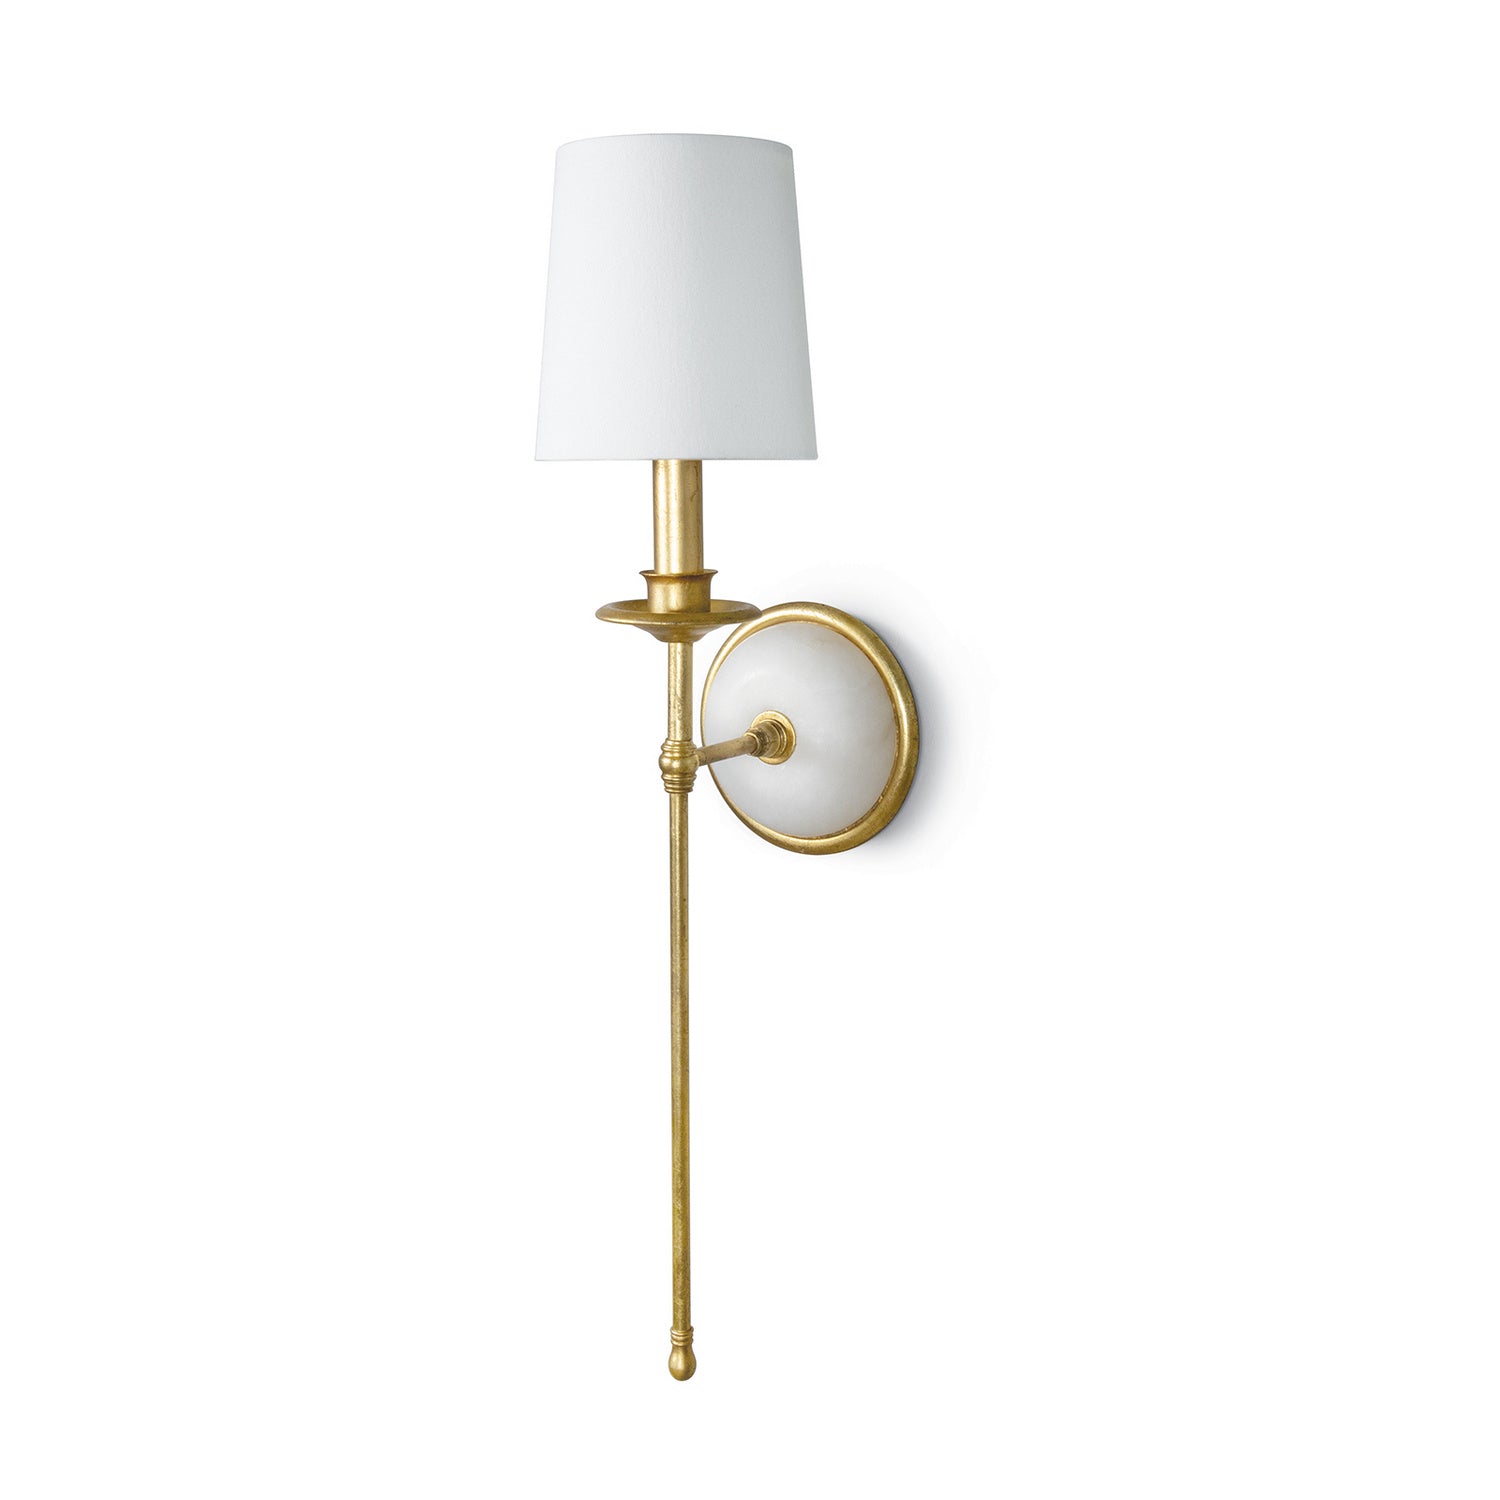 Regina Andrew - 15-1165 - One Light Wall Sconce - Fisher - Gold Leaf